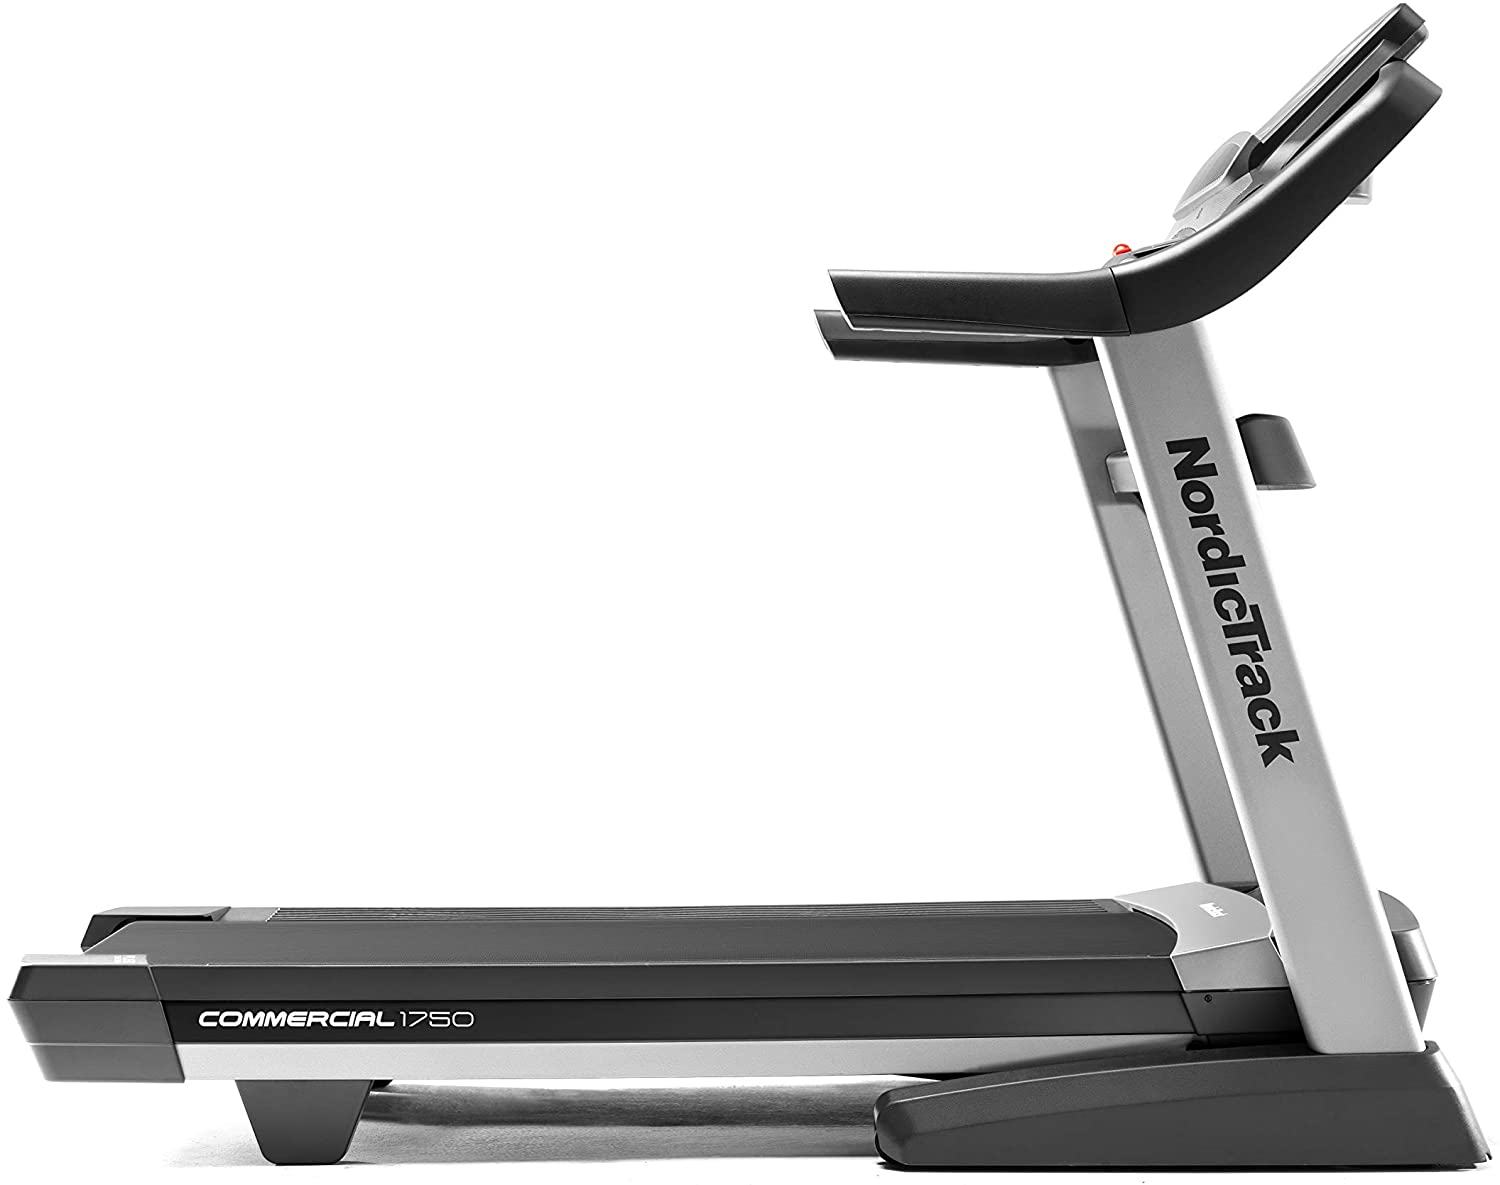 2021 Nordictrack Commercial 1750 Foldable Treadmill